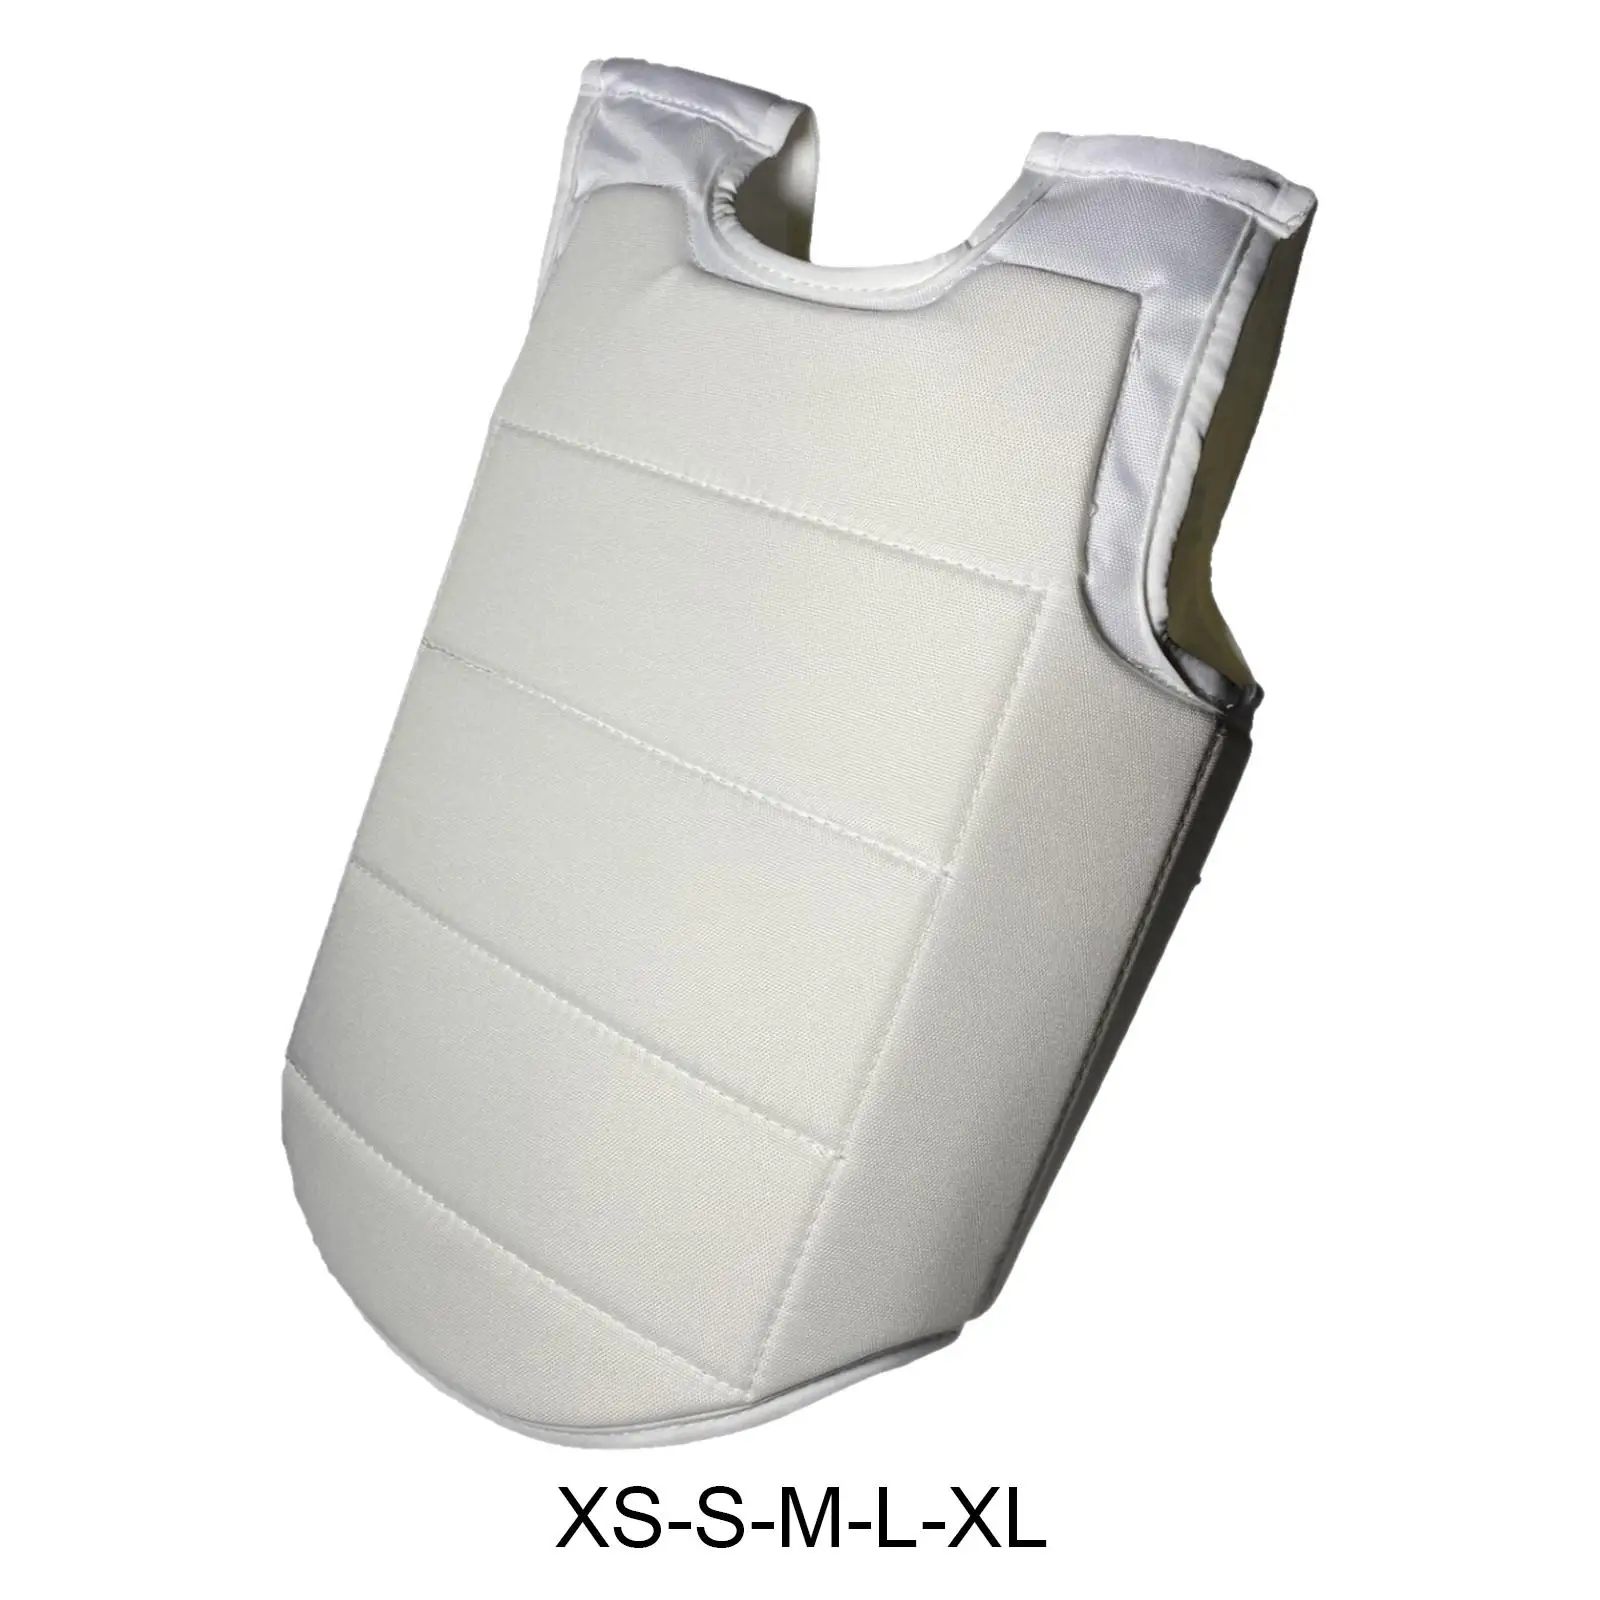 Karate Chest Protector Chest Guard Belly Ribs Protection Pad Body Protector for Men Women Children